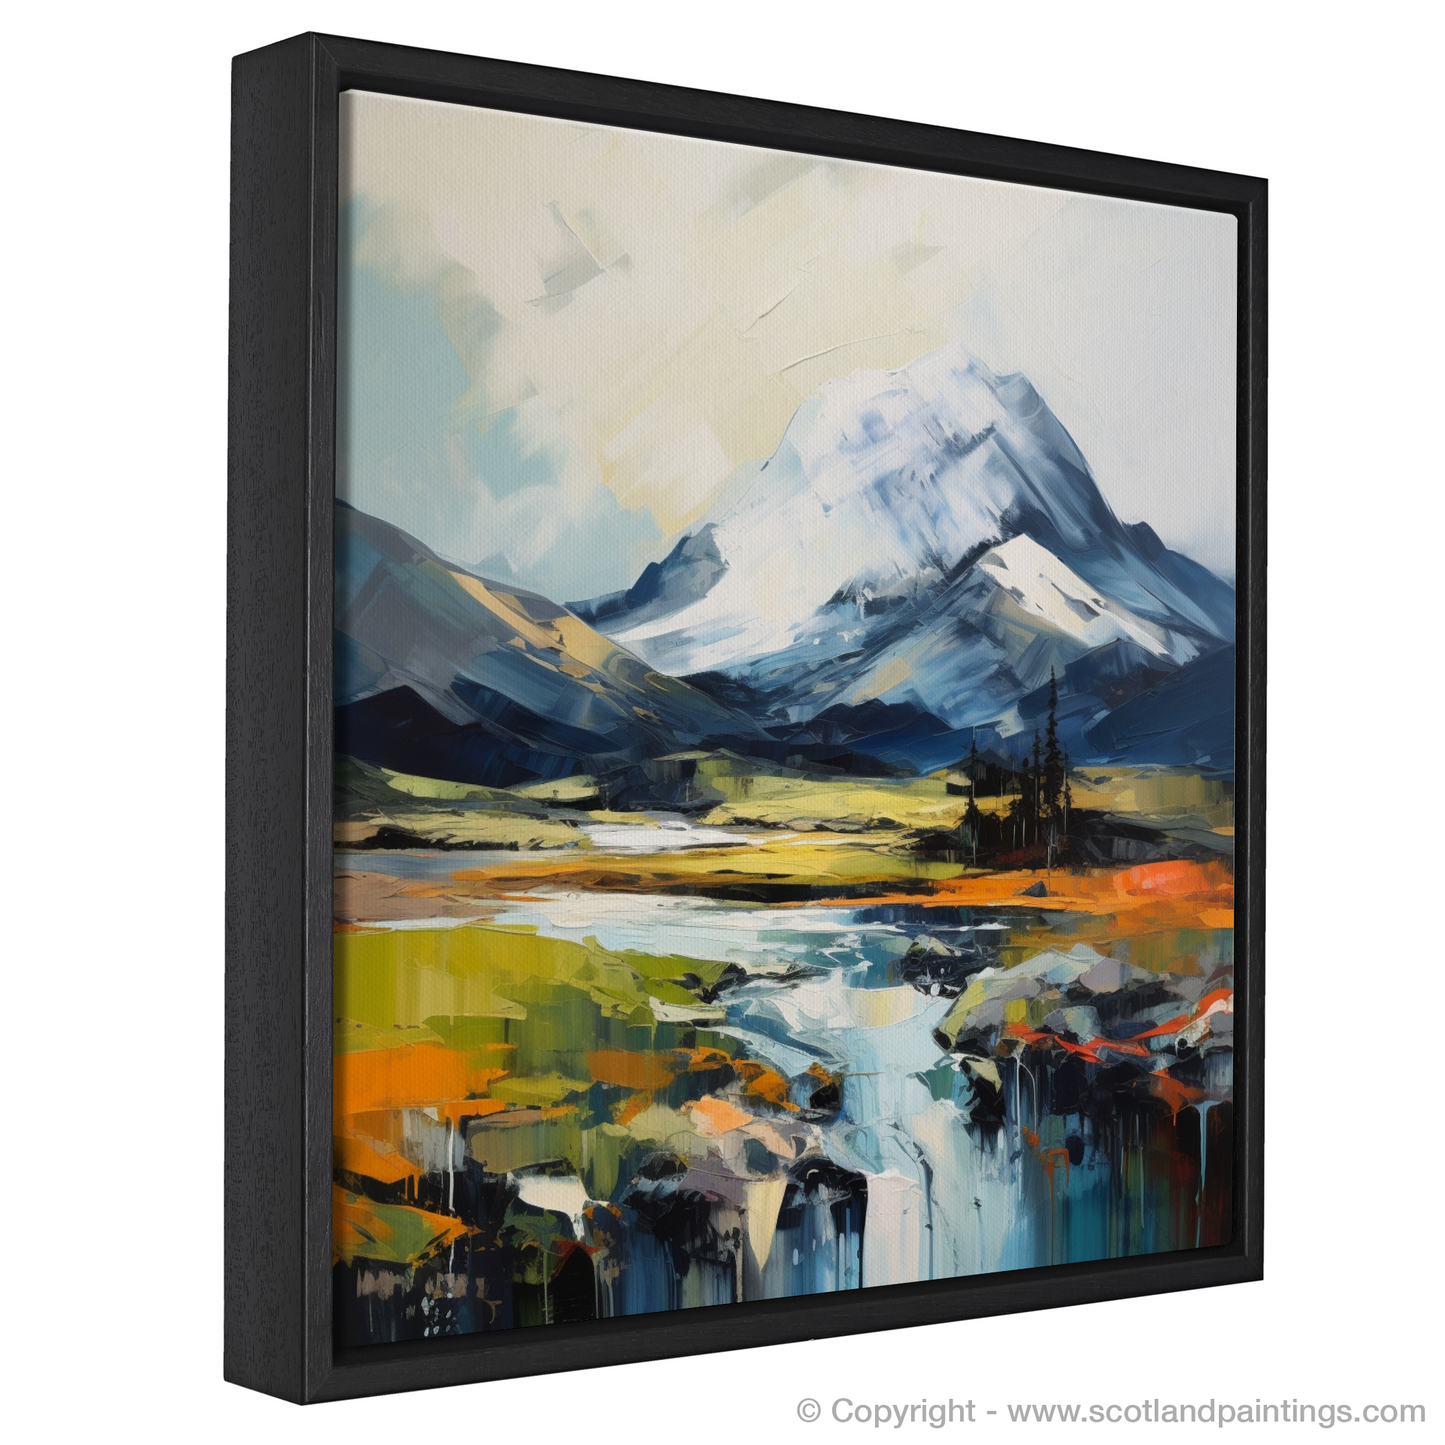 Painting and Art Print of Ben More entitled "Majestic Ben More: An Expressionist Ode to Scotland's Wild Highlands".